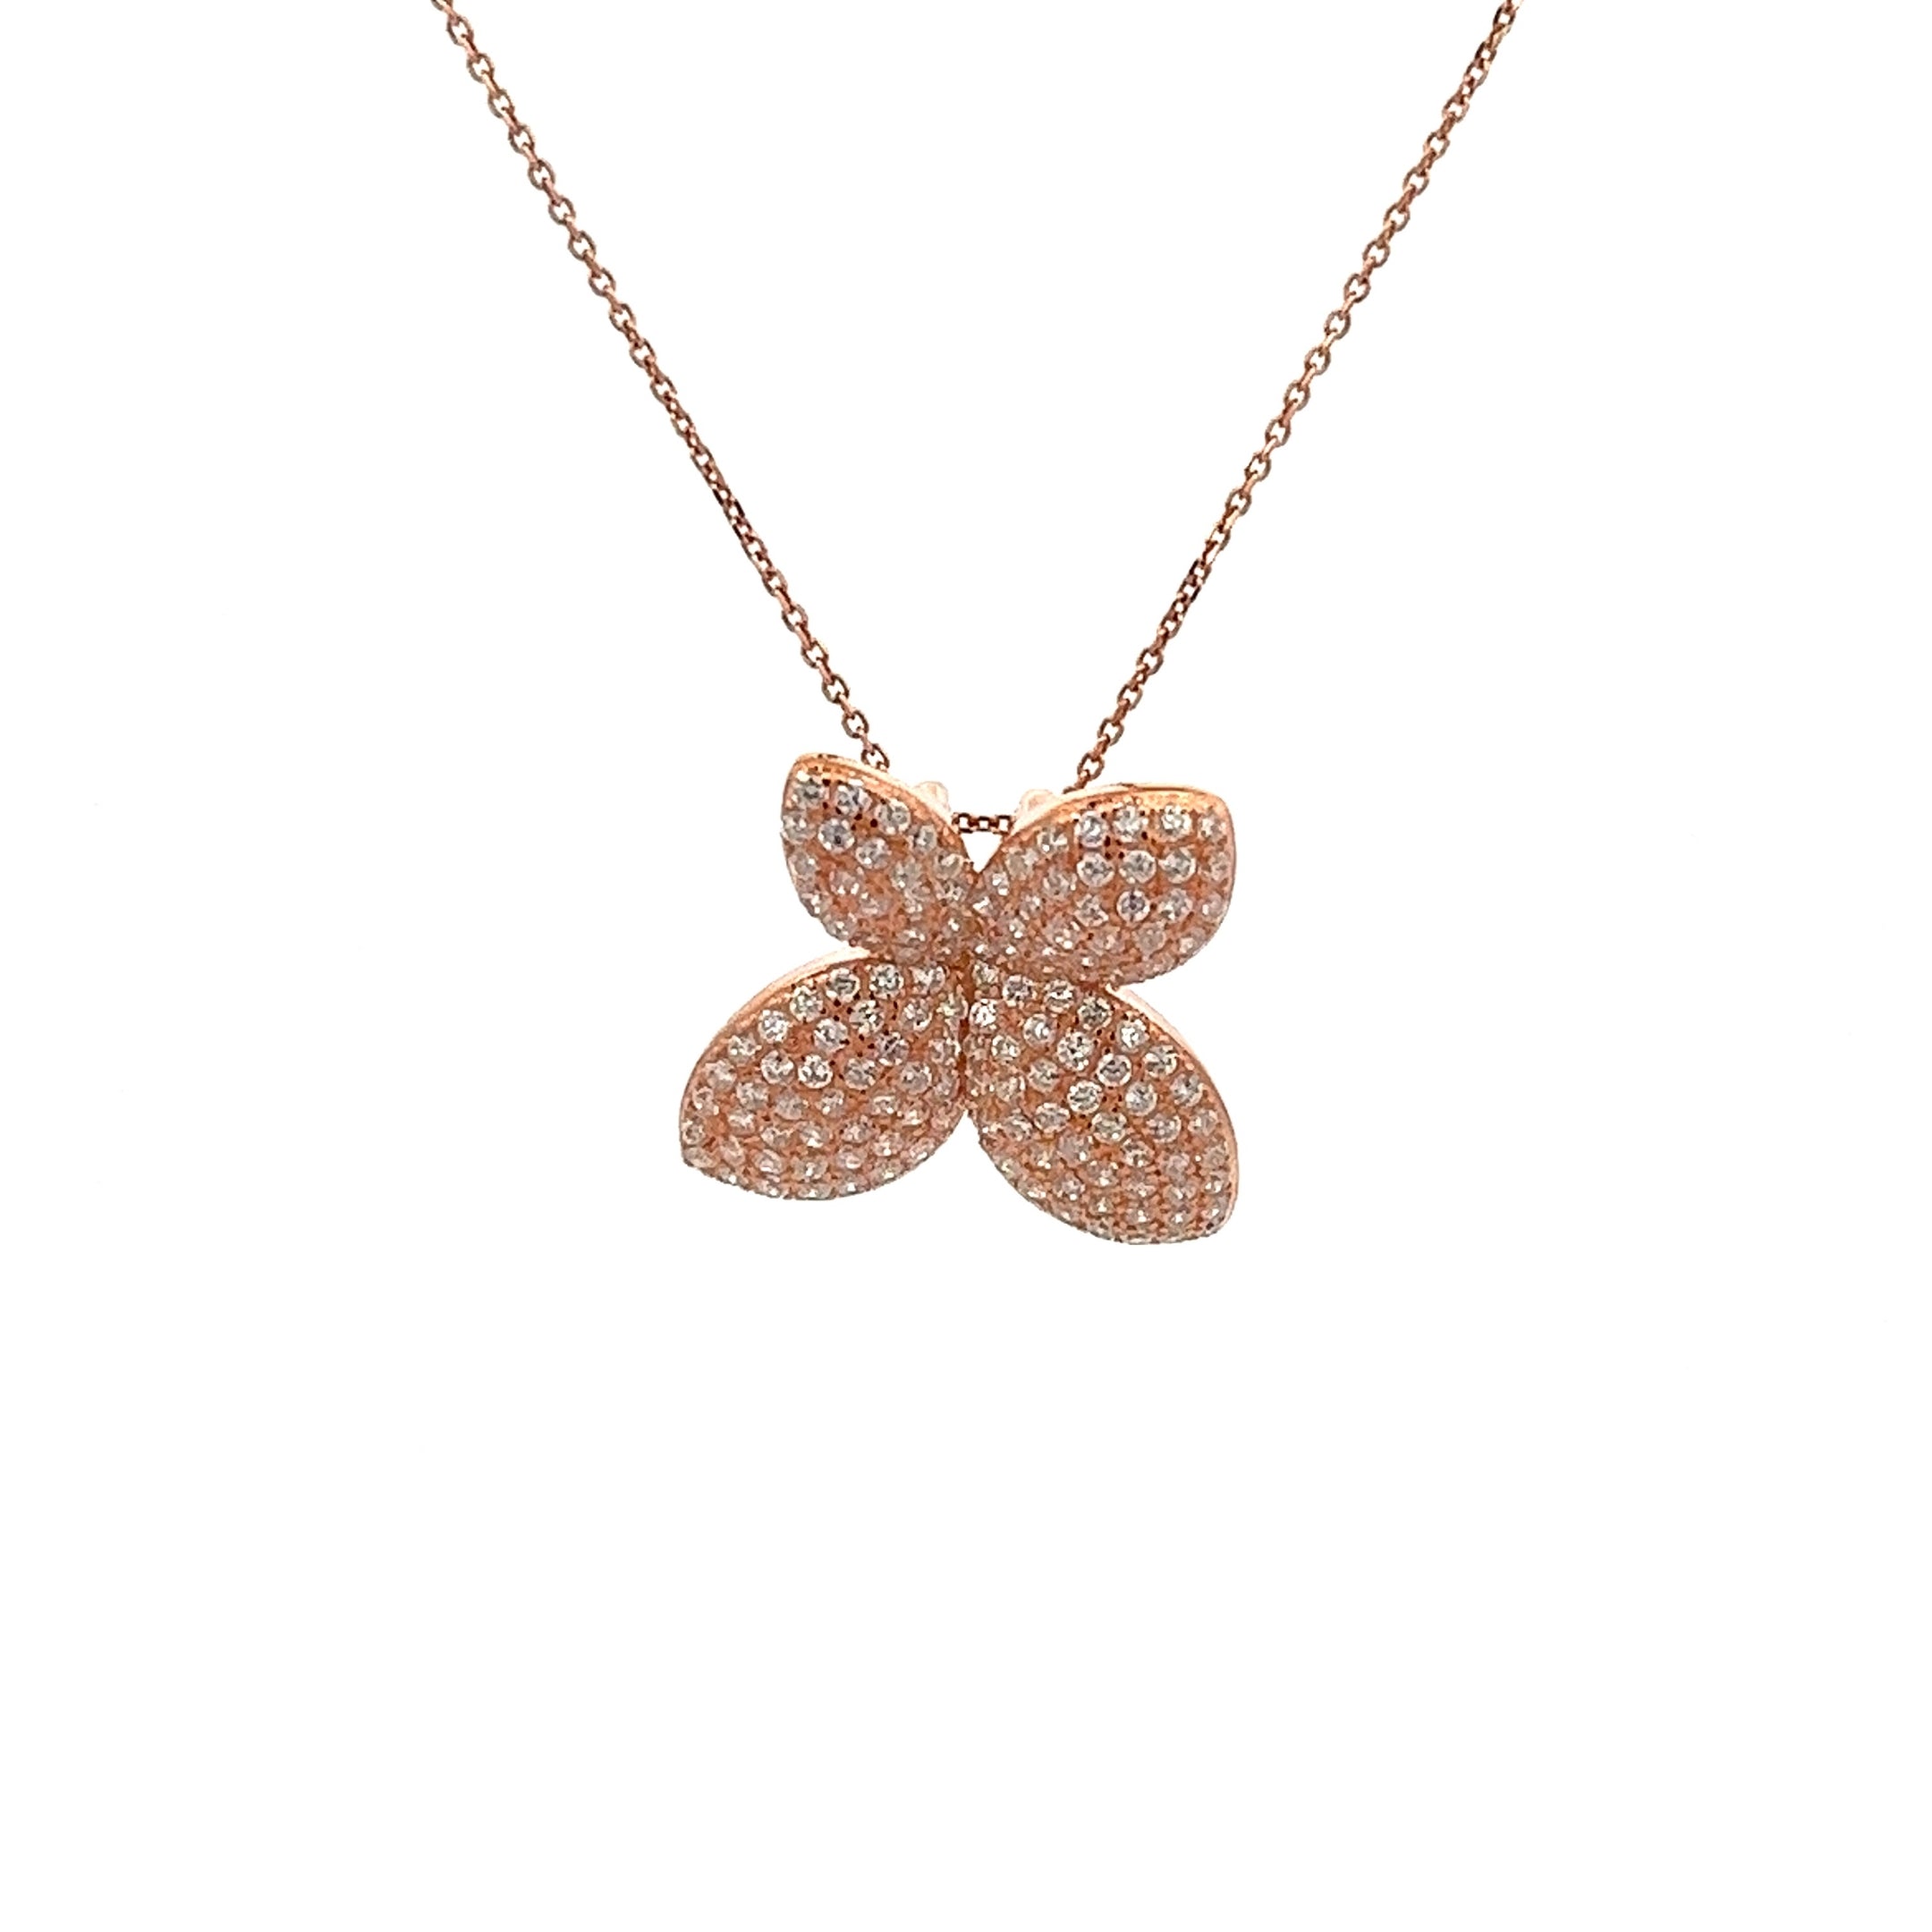 925 ROSE GOLD PLATED FLOWER PENDANT WITH CRYSTALS